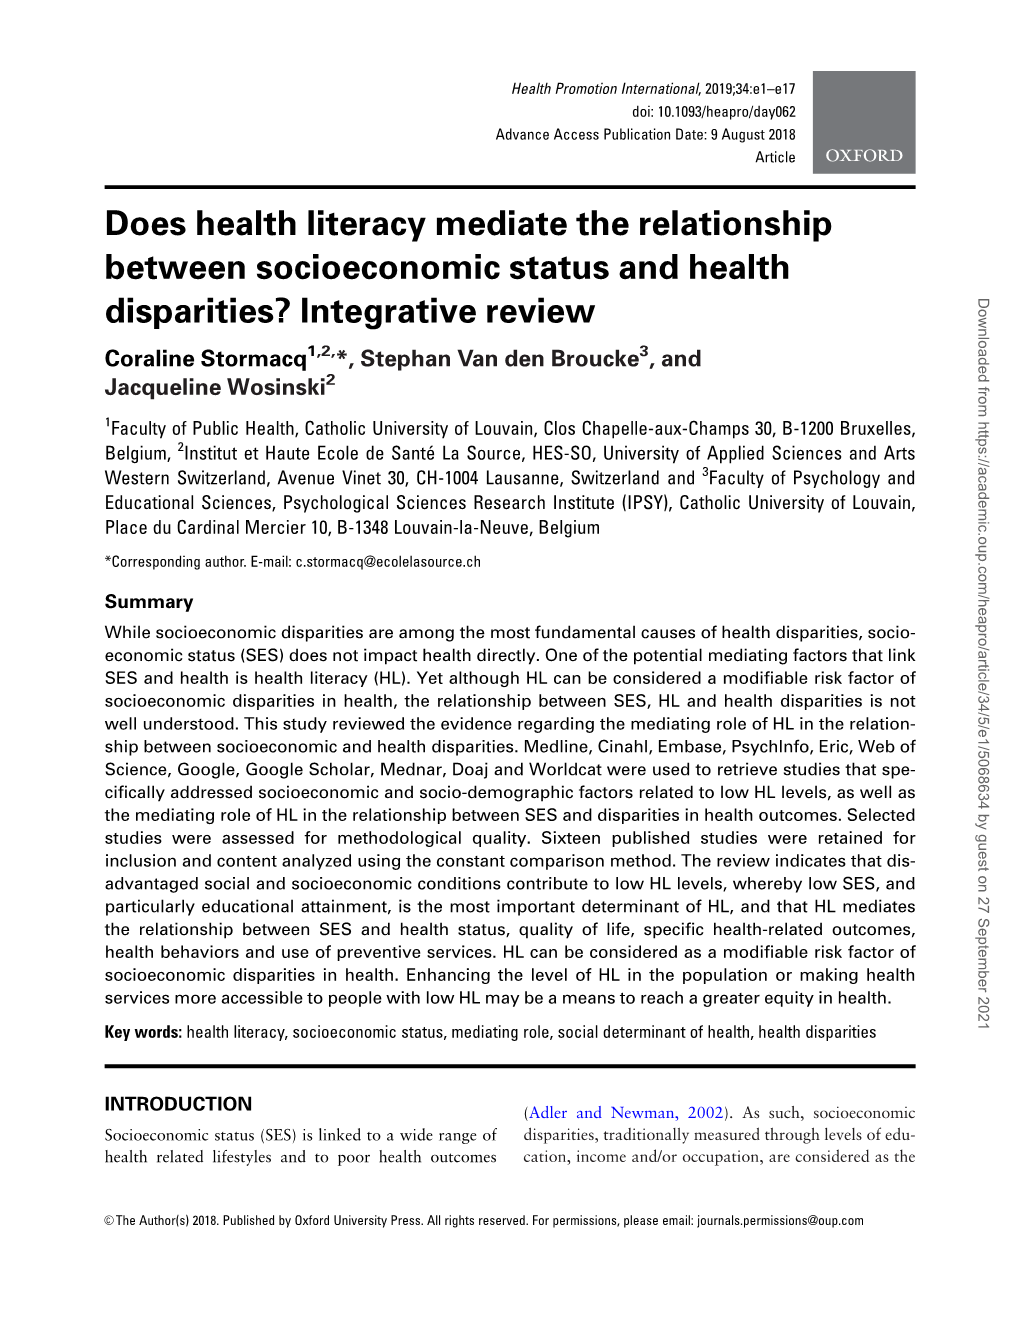 Does Health Literacy Mediate the Relationship Between